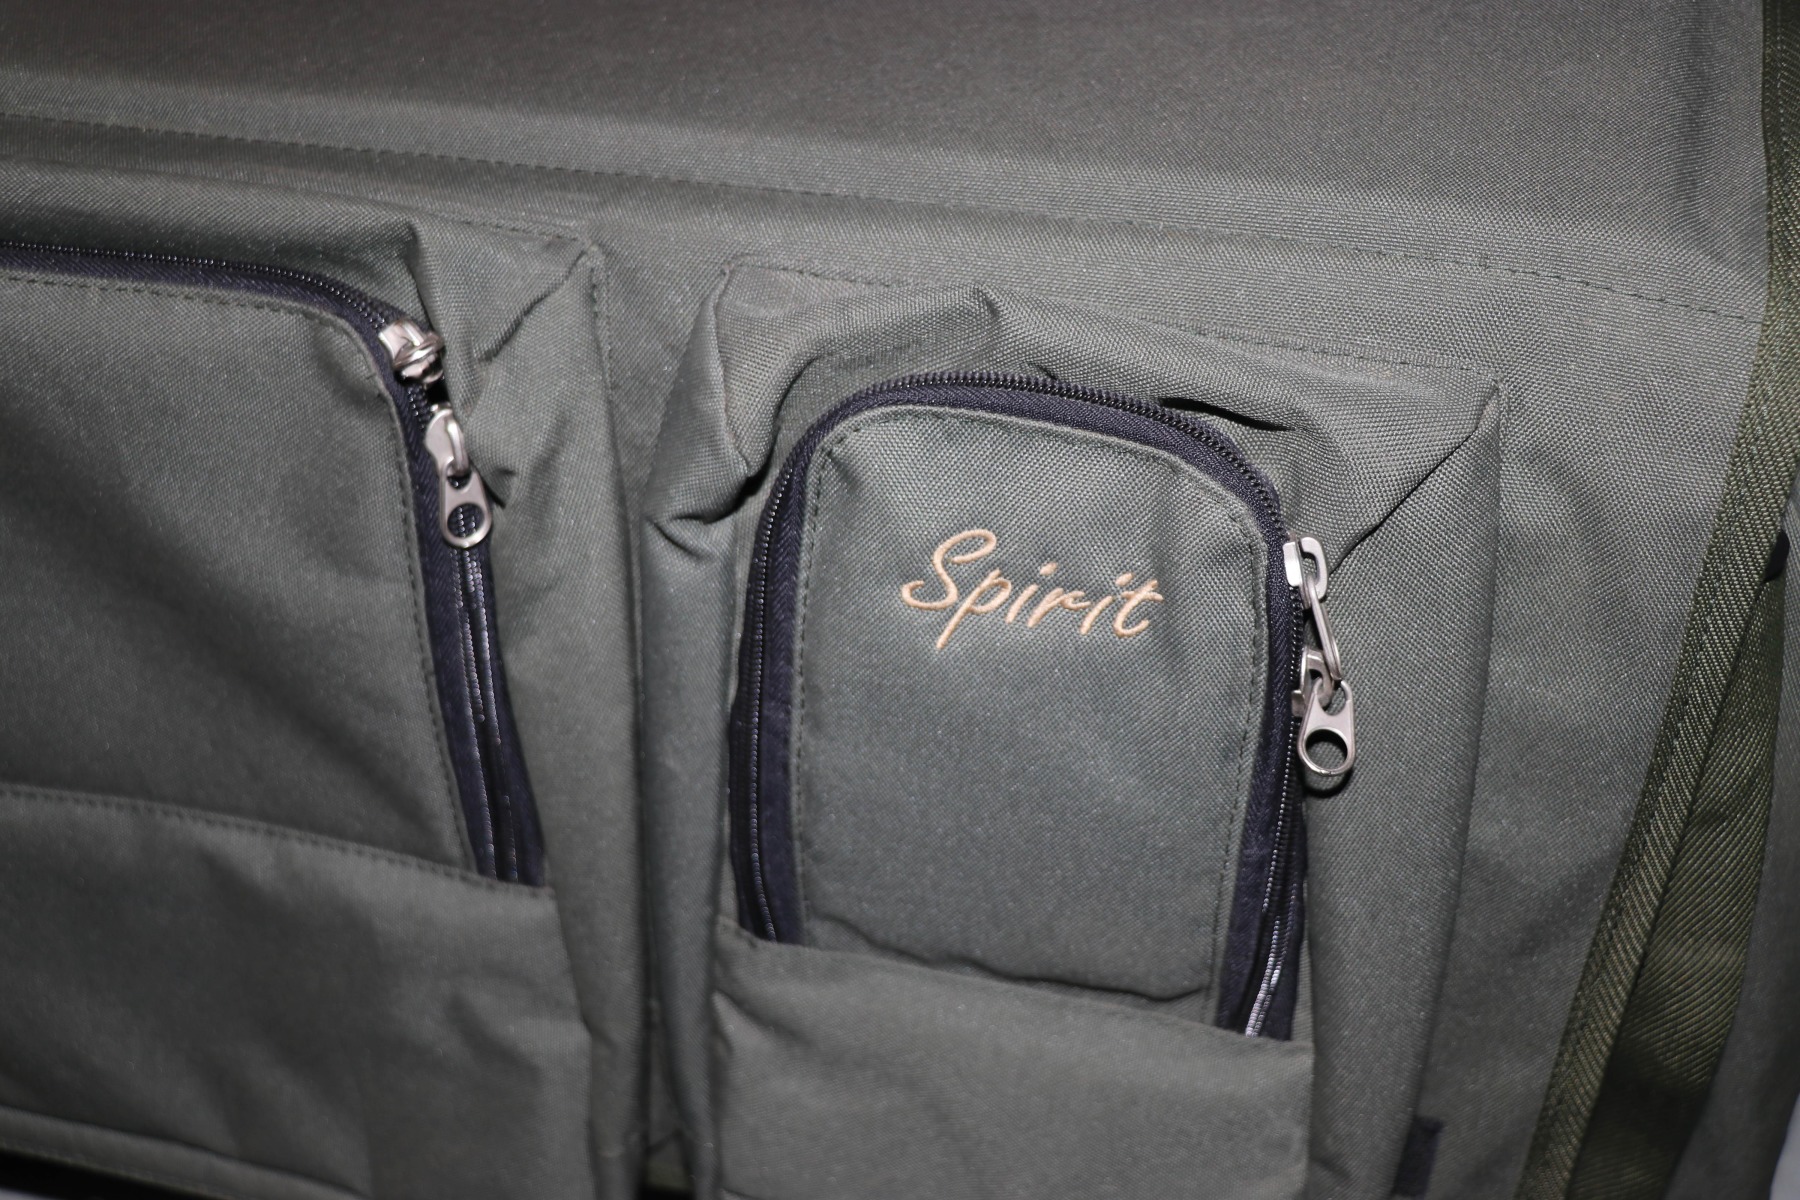 Home to the bulk of my gear are two Free Spirit carryalls